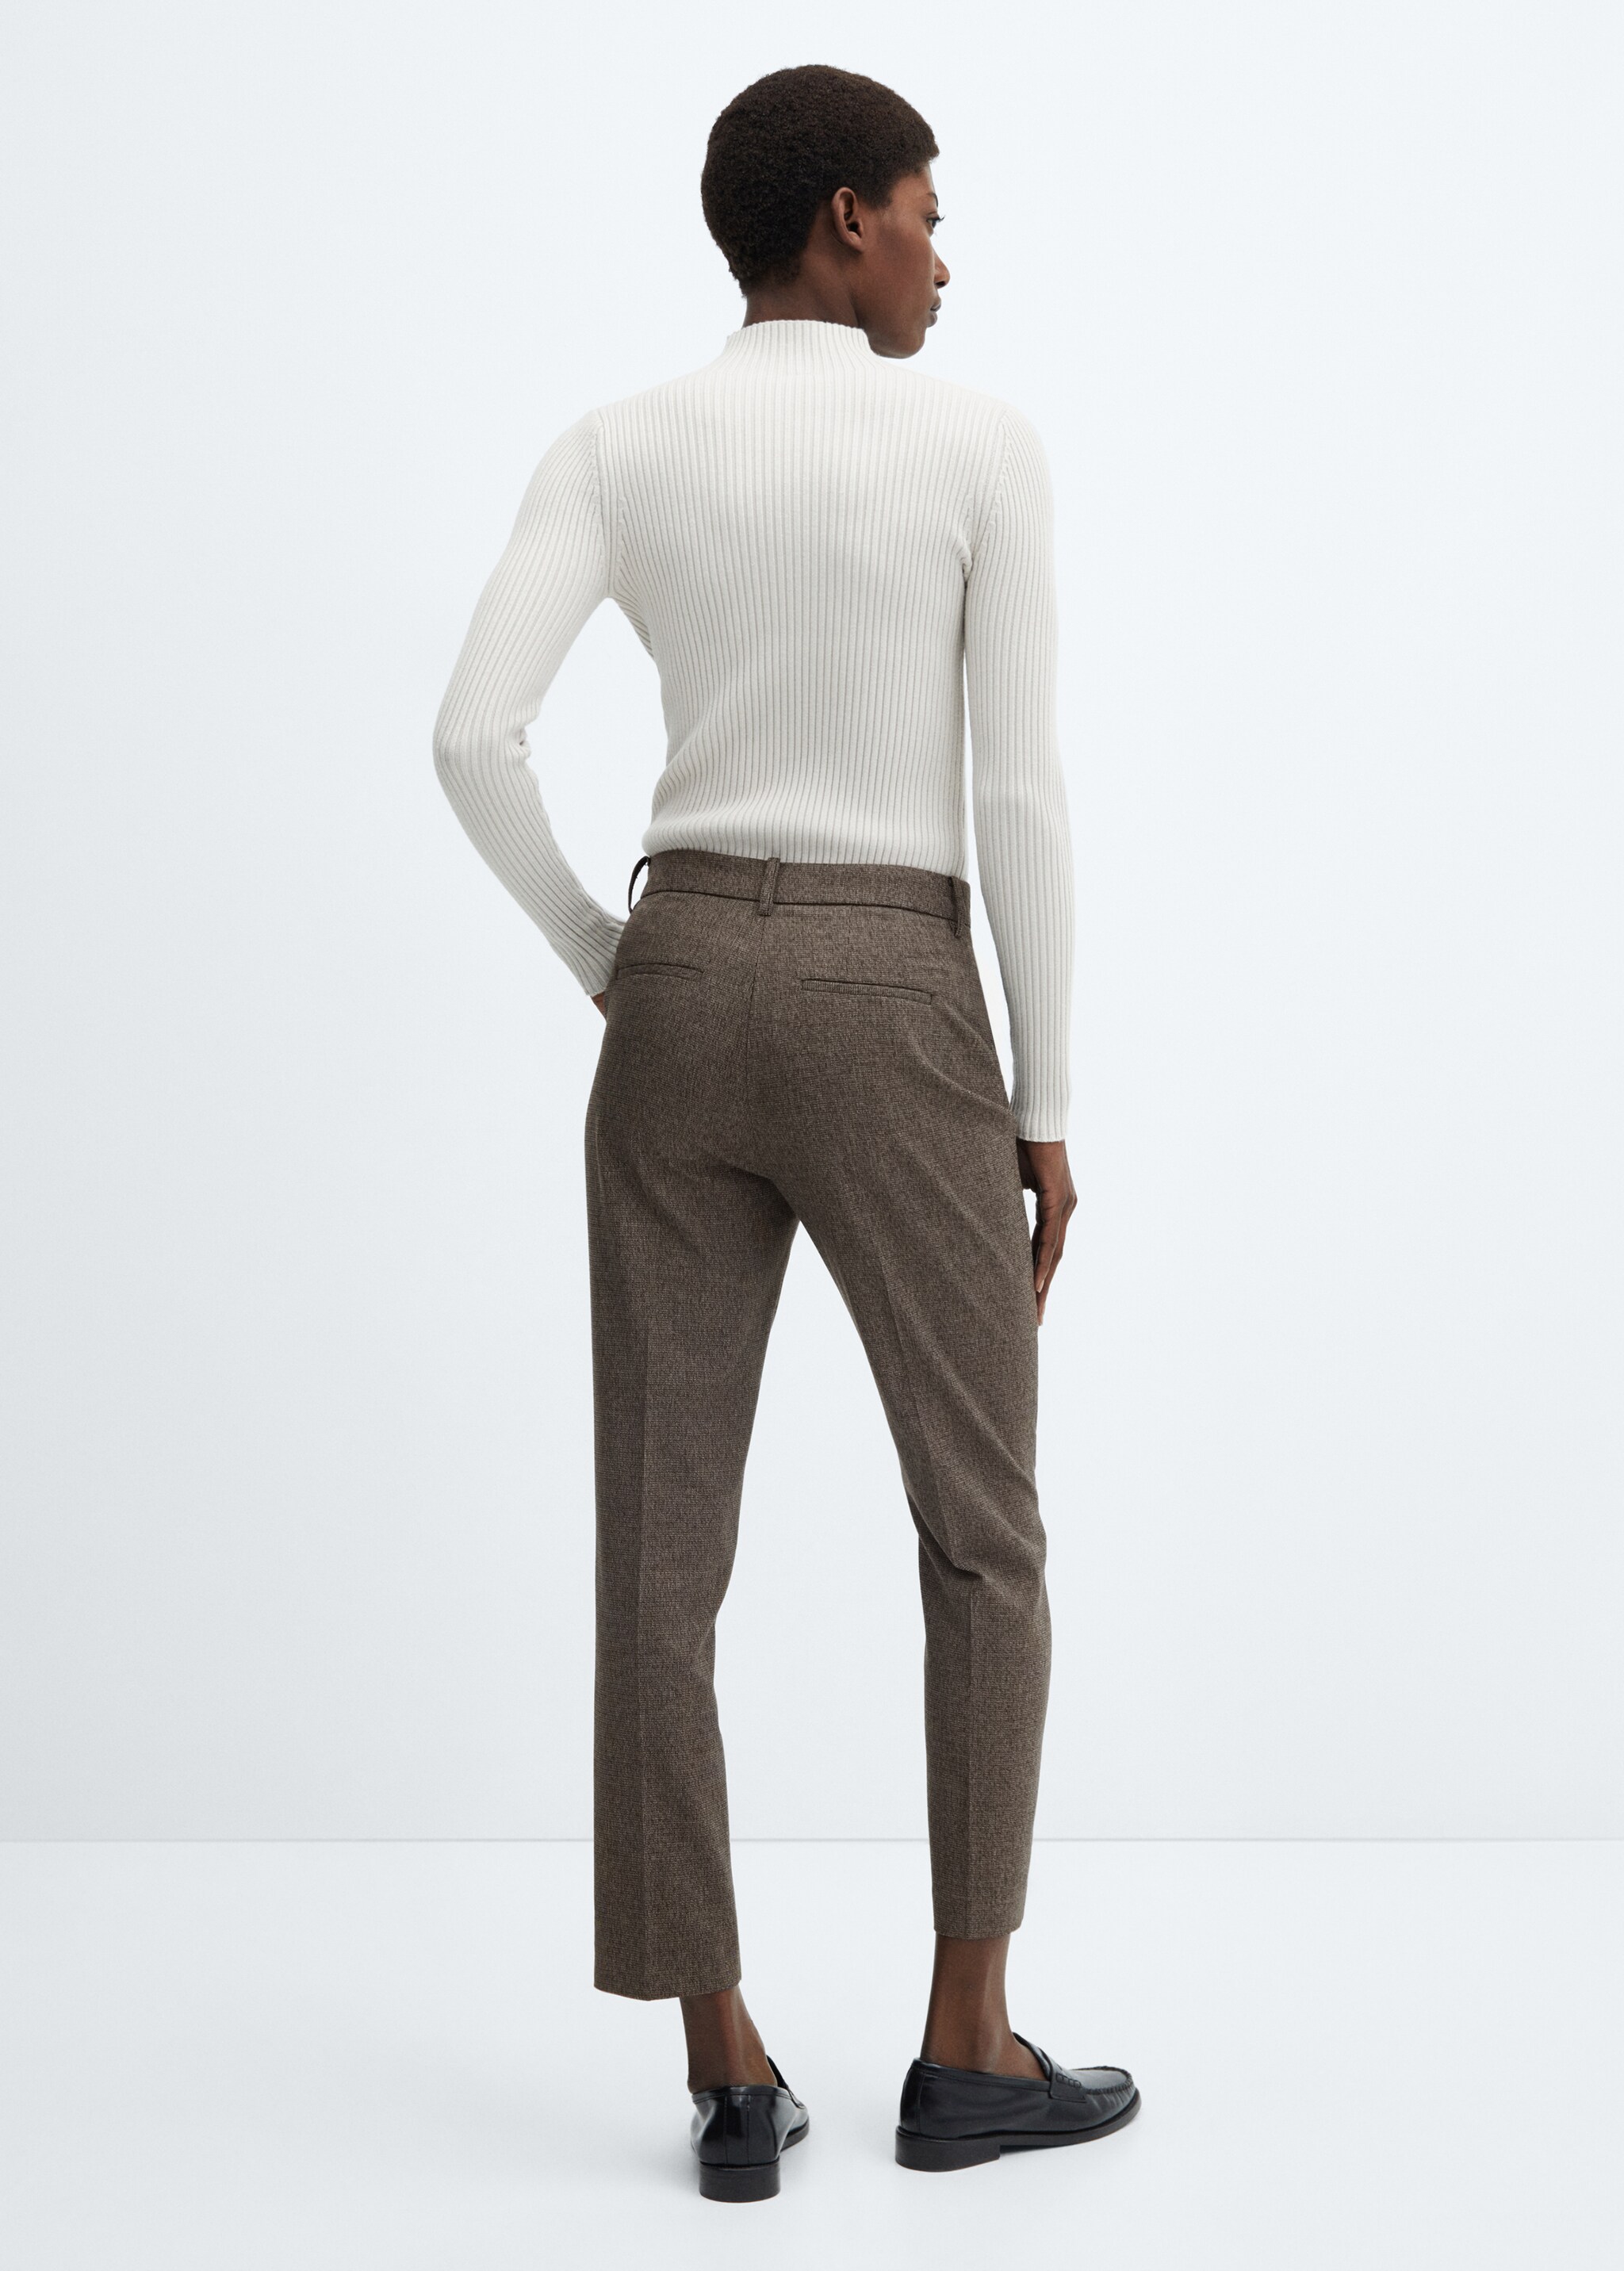 Mid-rise skinny pants - Reverse of the article